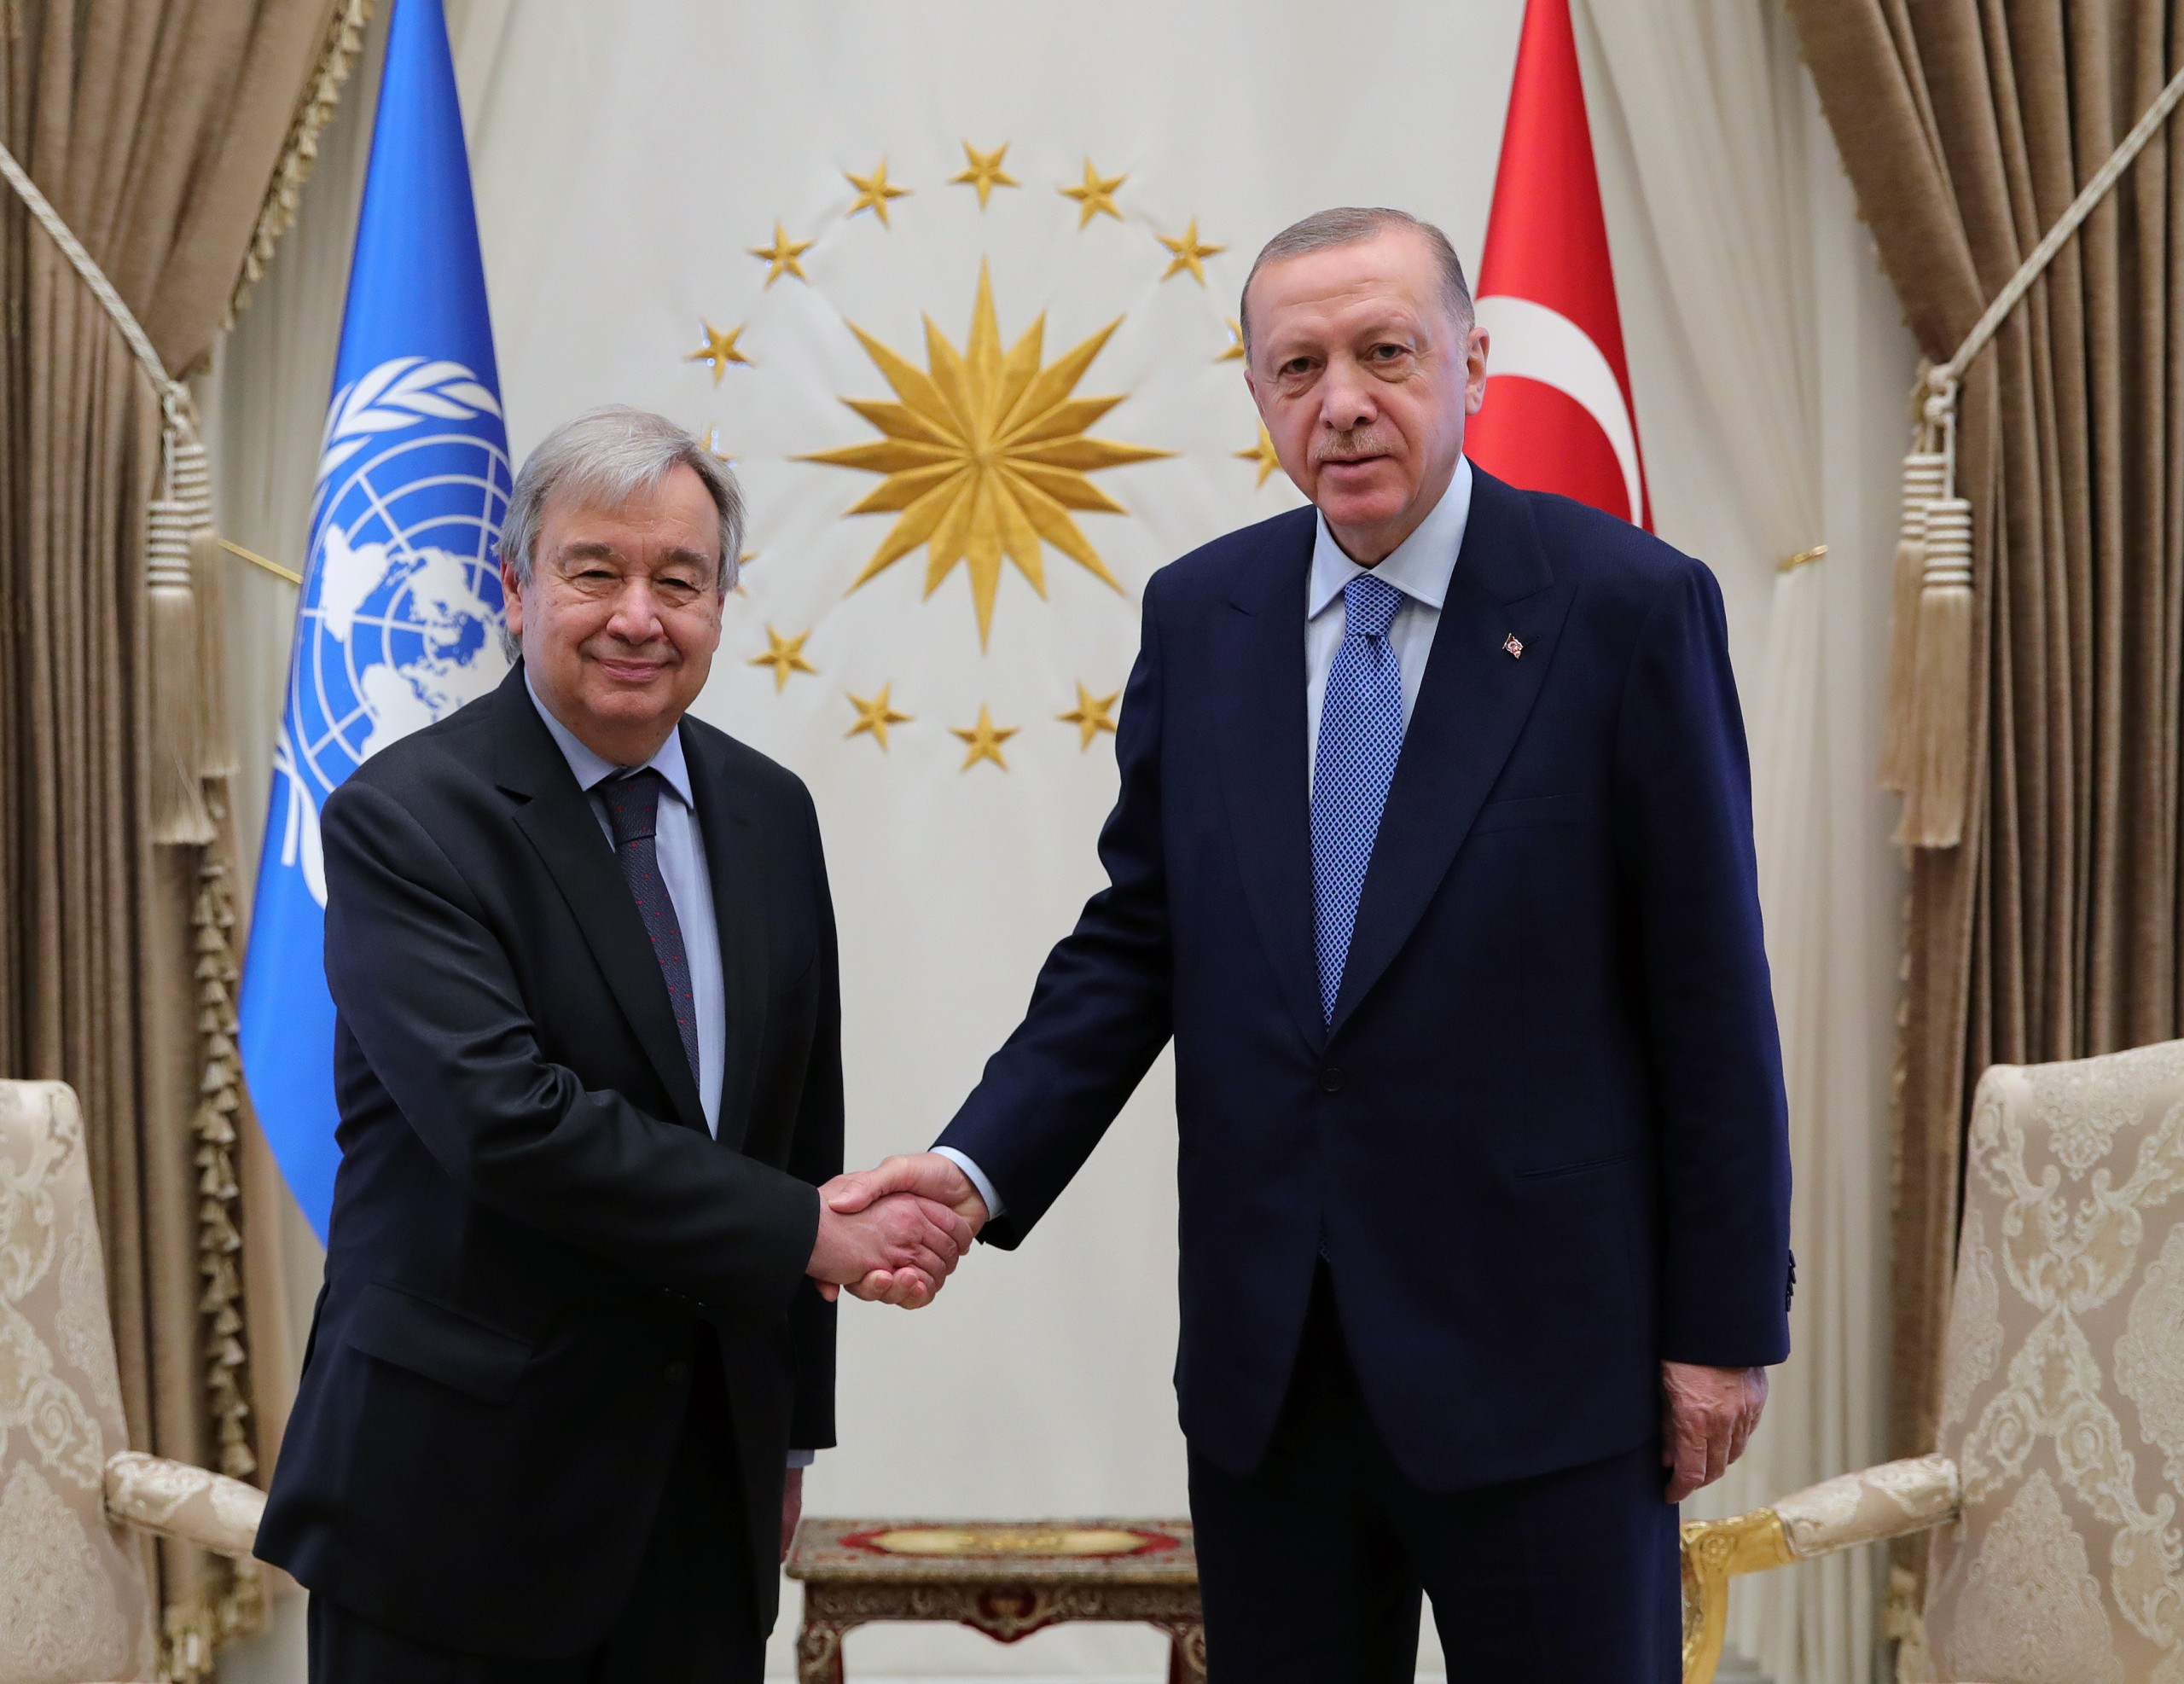 epa09908466 A handout photo made available by the Turkish President Press Office shows, Turkish President Recep Tayyip Erdogan (R) shaking hands with United Nations Secretary-General Antonio Guterres (L) during their meeting in Ankara, Turkey, 25 April 2022.  EPA/TURKISH PRESIDENT PRESS OFFICE HANDOUT HANDOUT  HANDOUT EDITORIAL USE ONLY/NO SALES